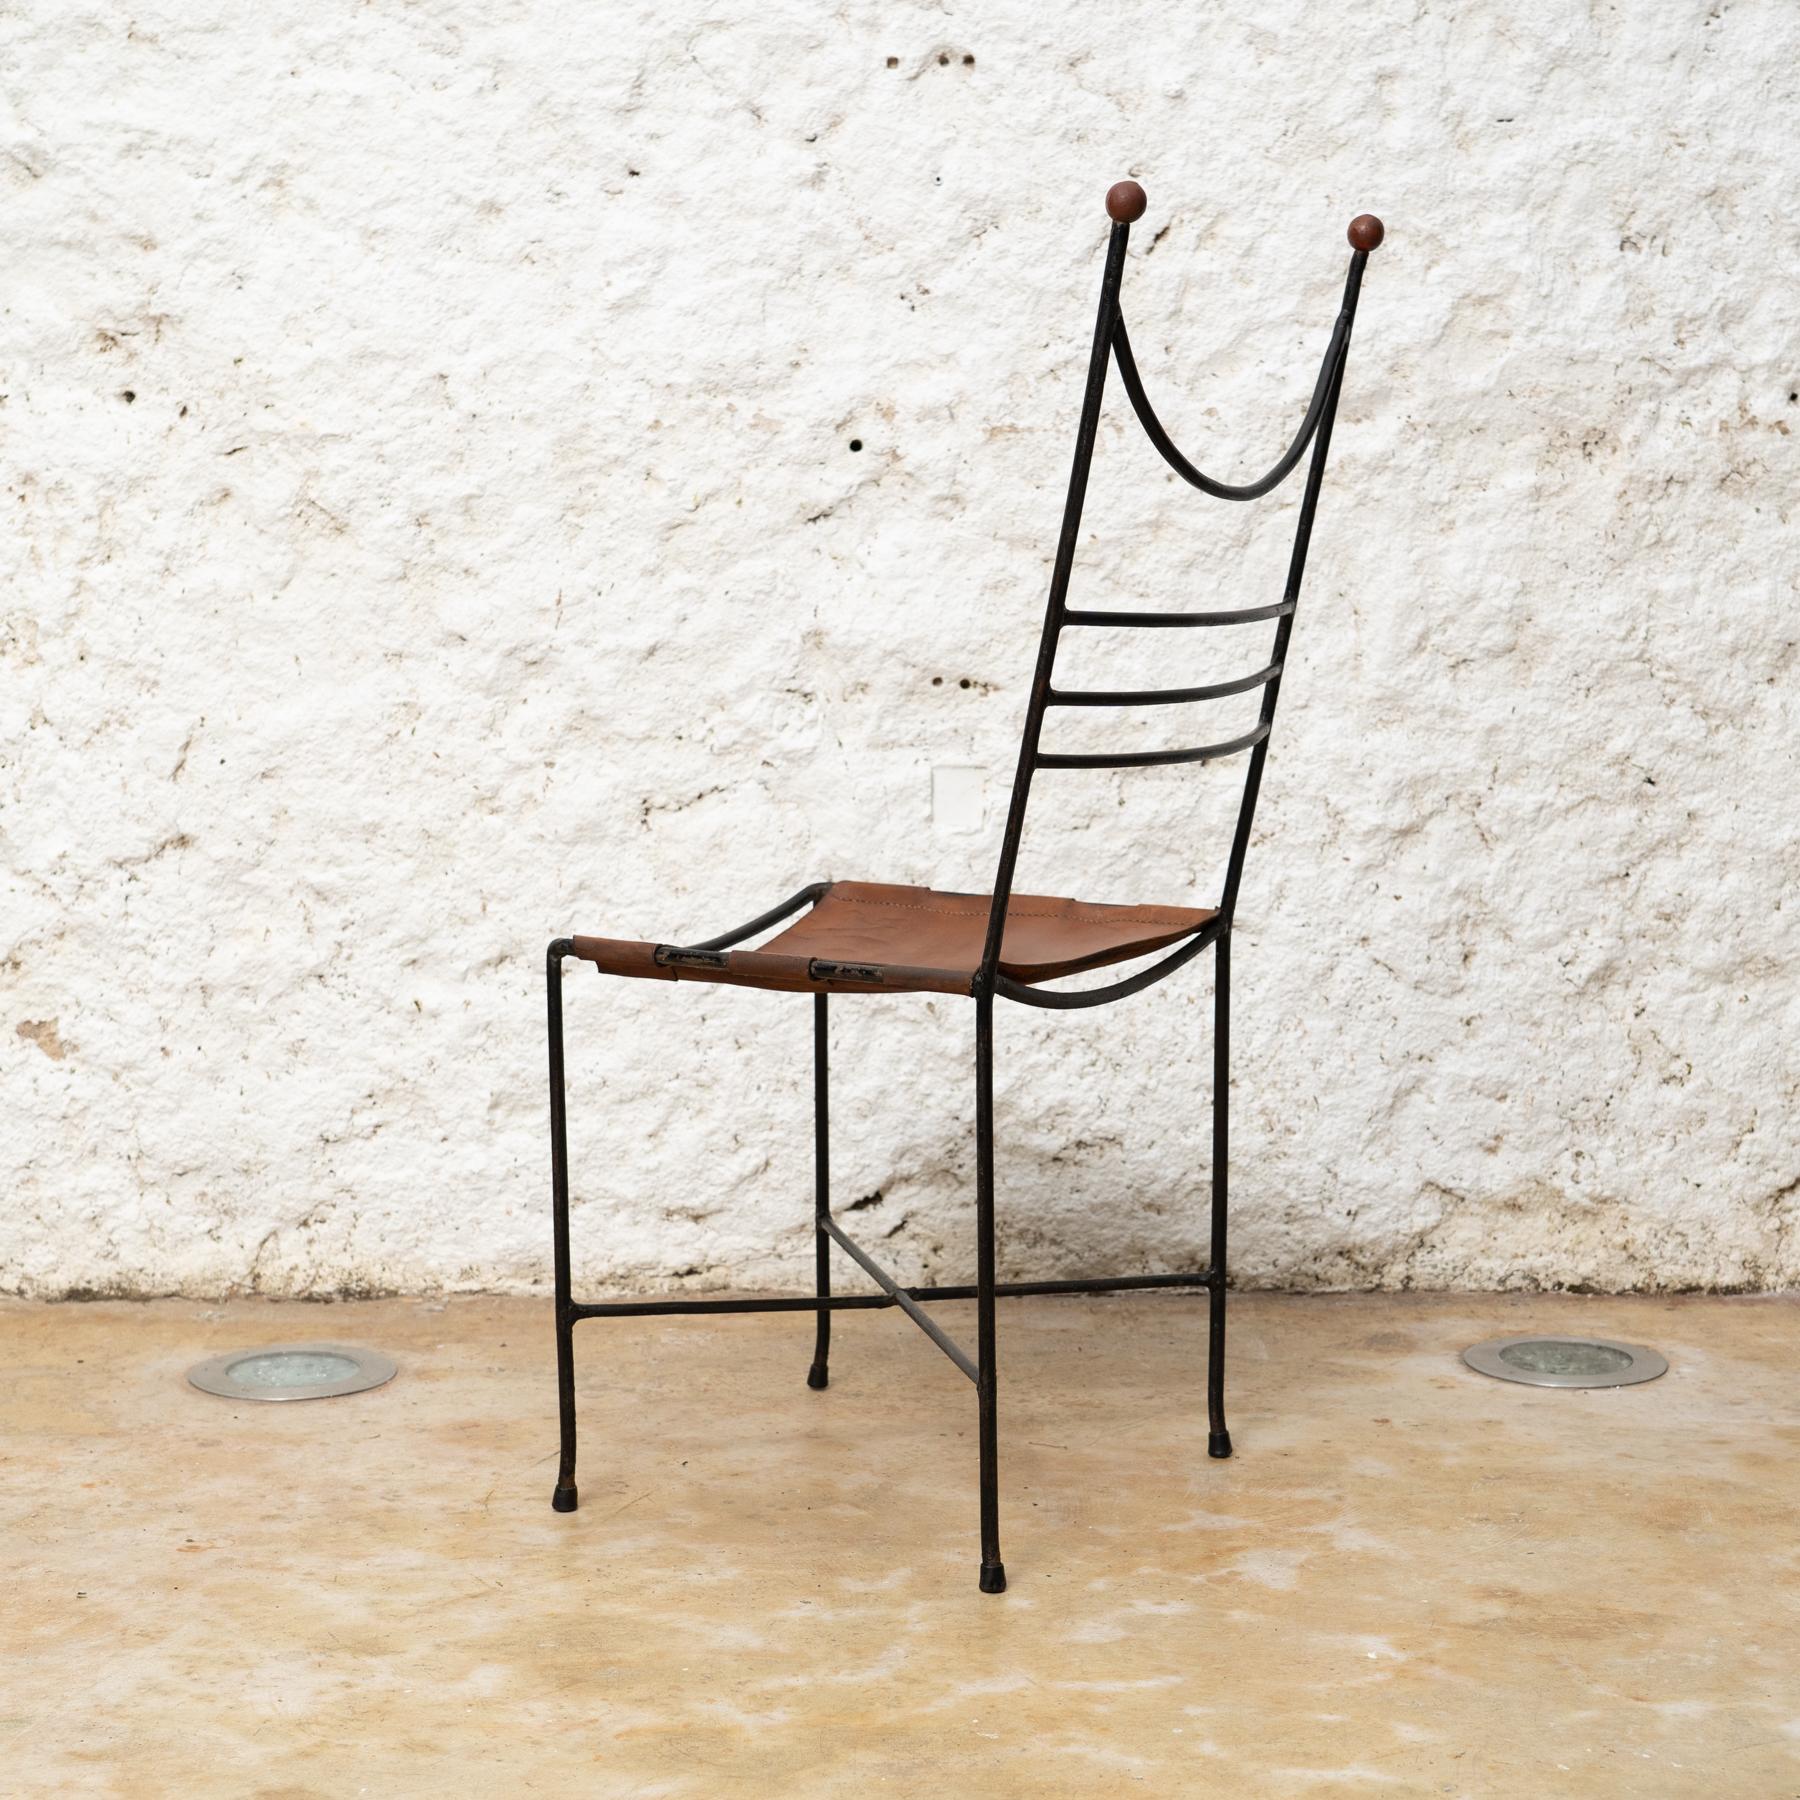 Mid-20th Century Pere Cosp Iron And Leather Chair Mid Century Modern, circa 1960 For Sale